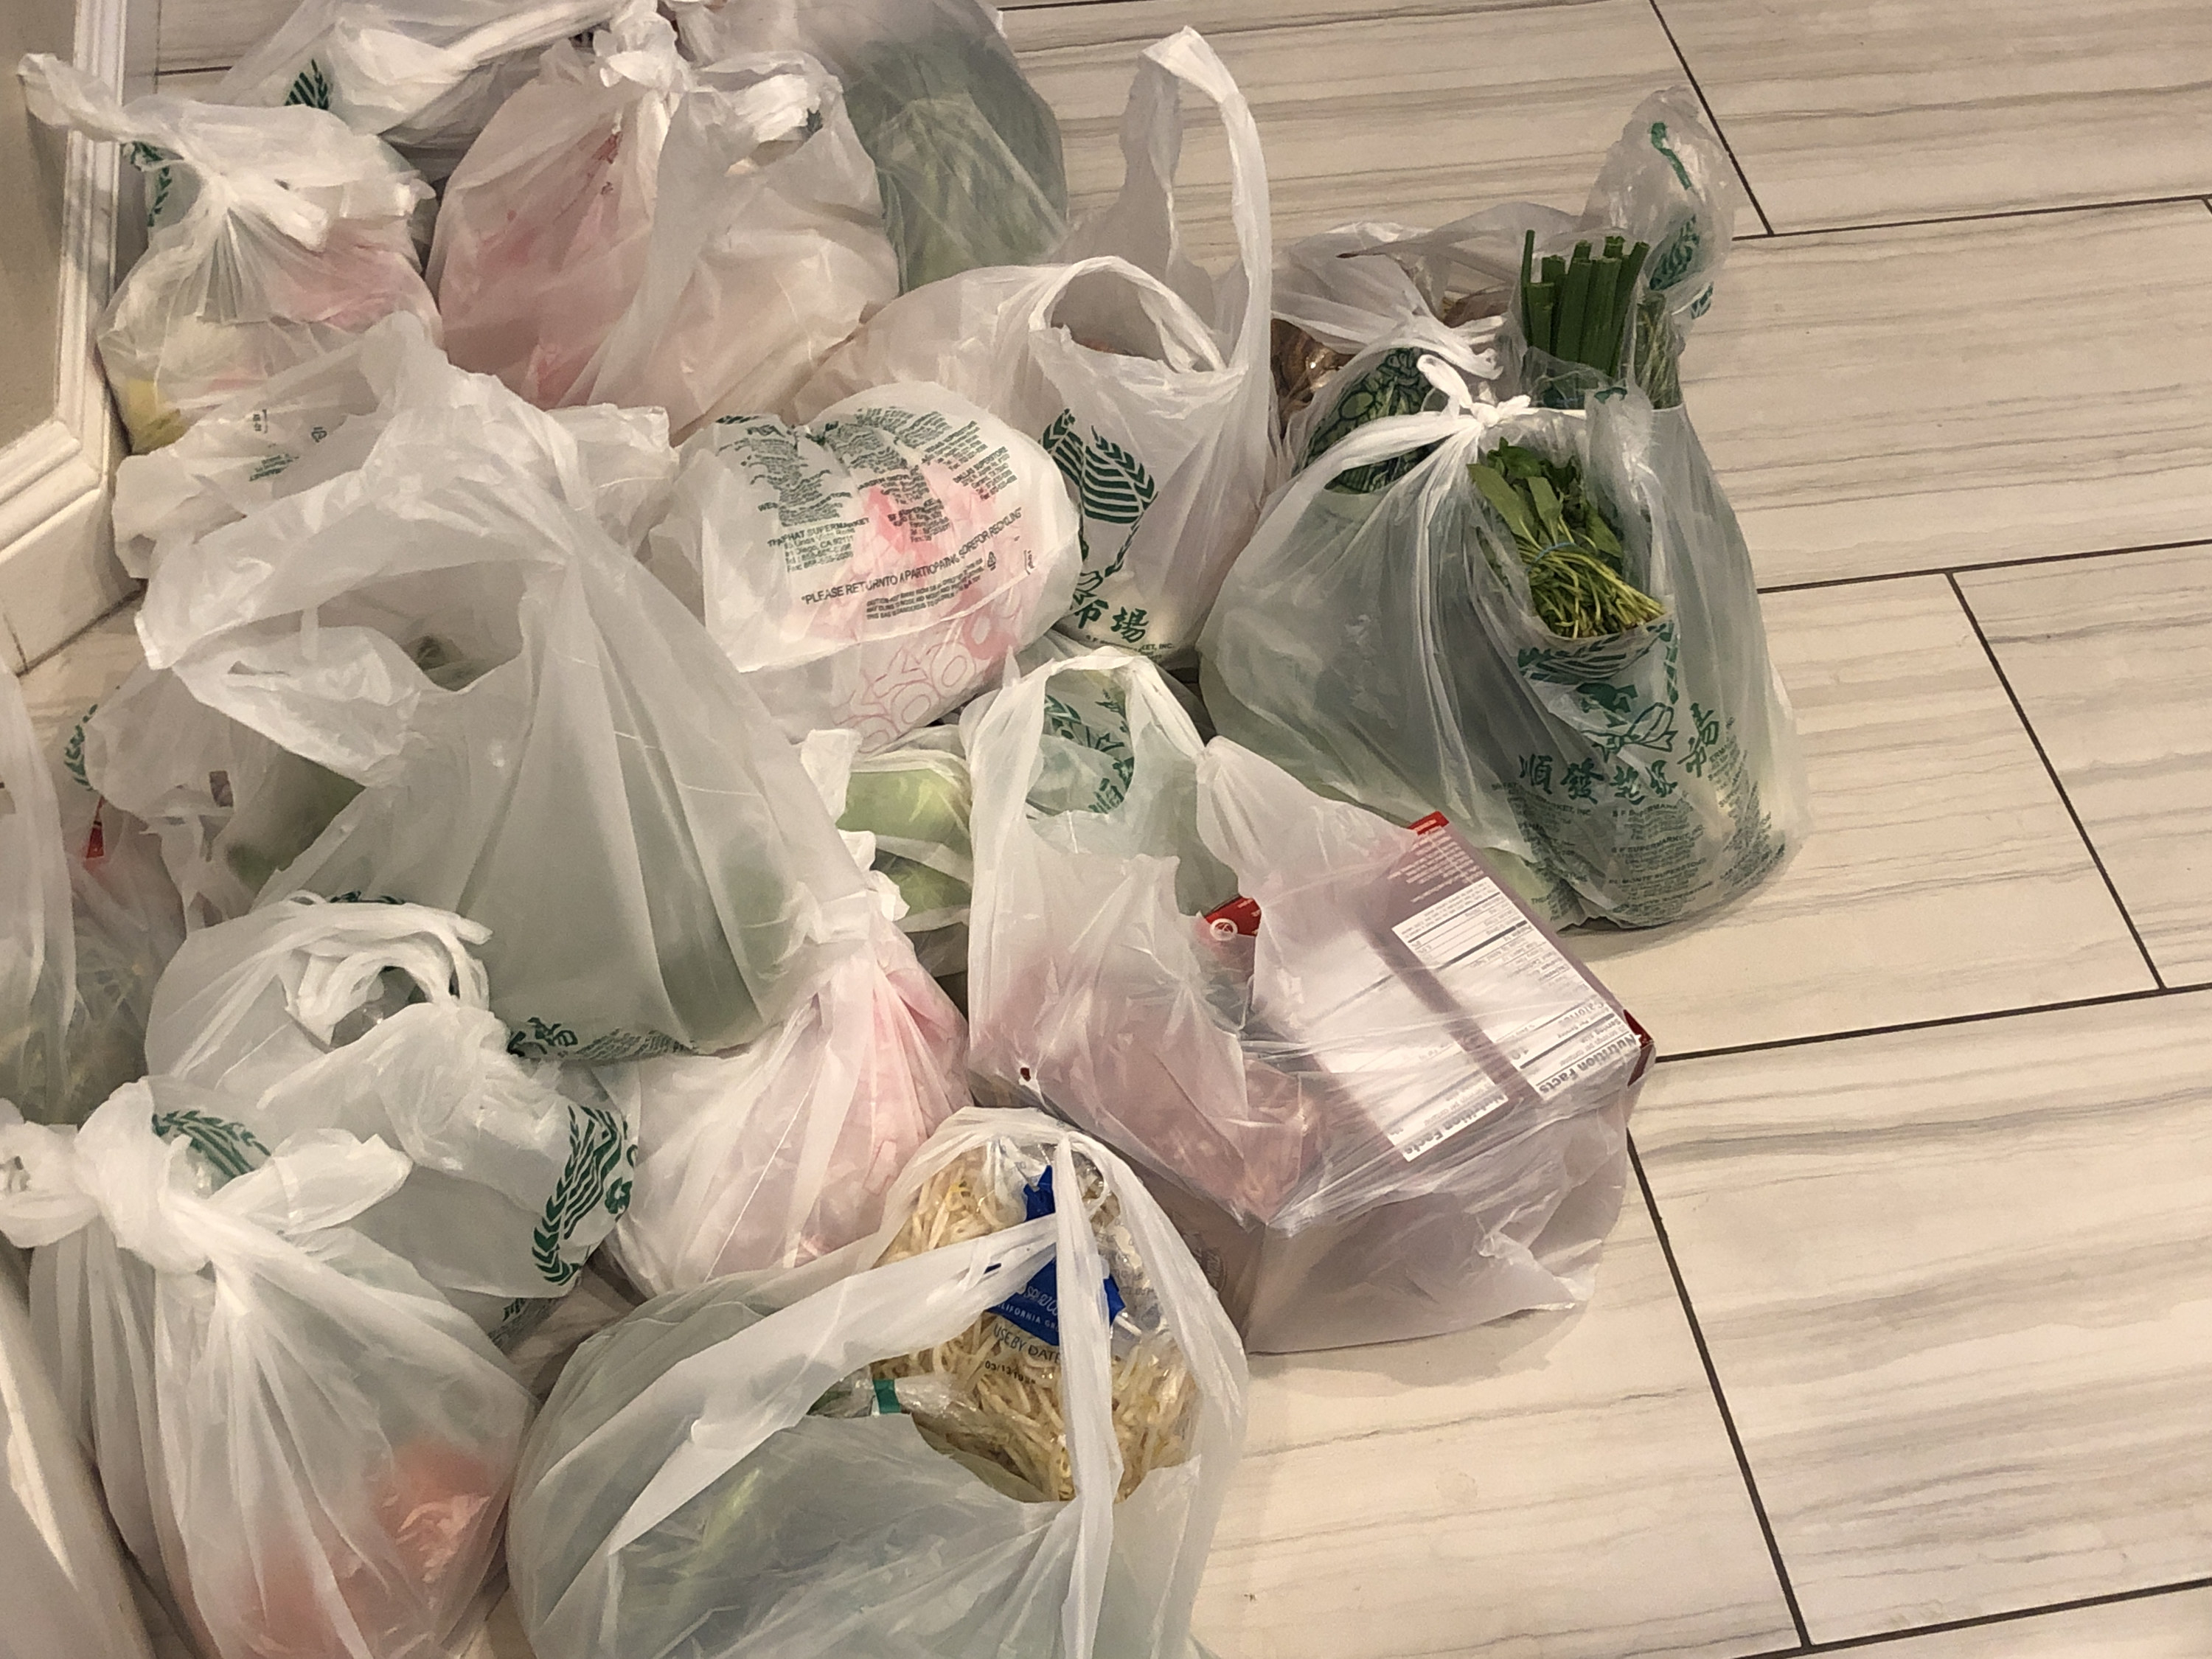 Plastic grocery bags holding groceries